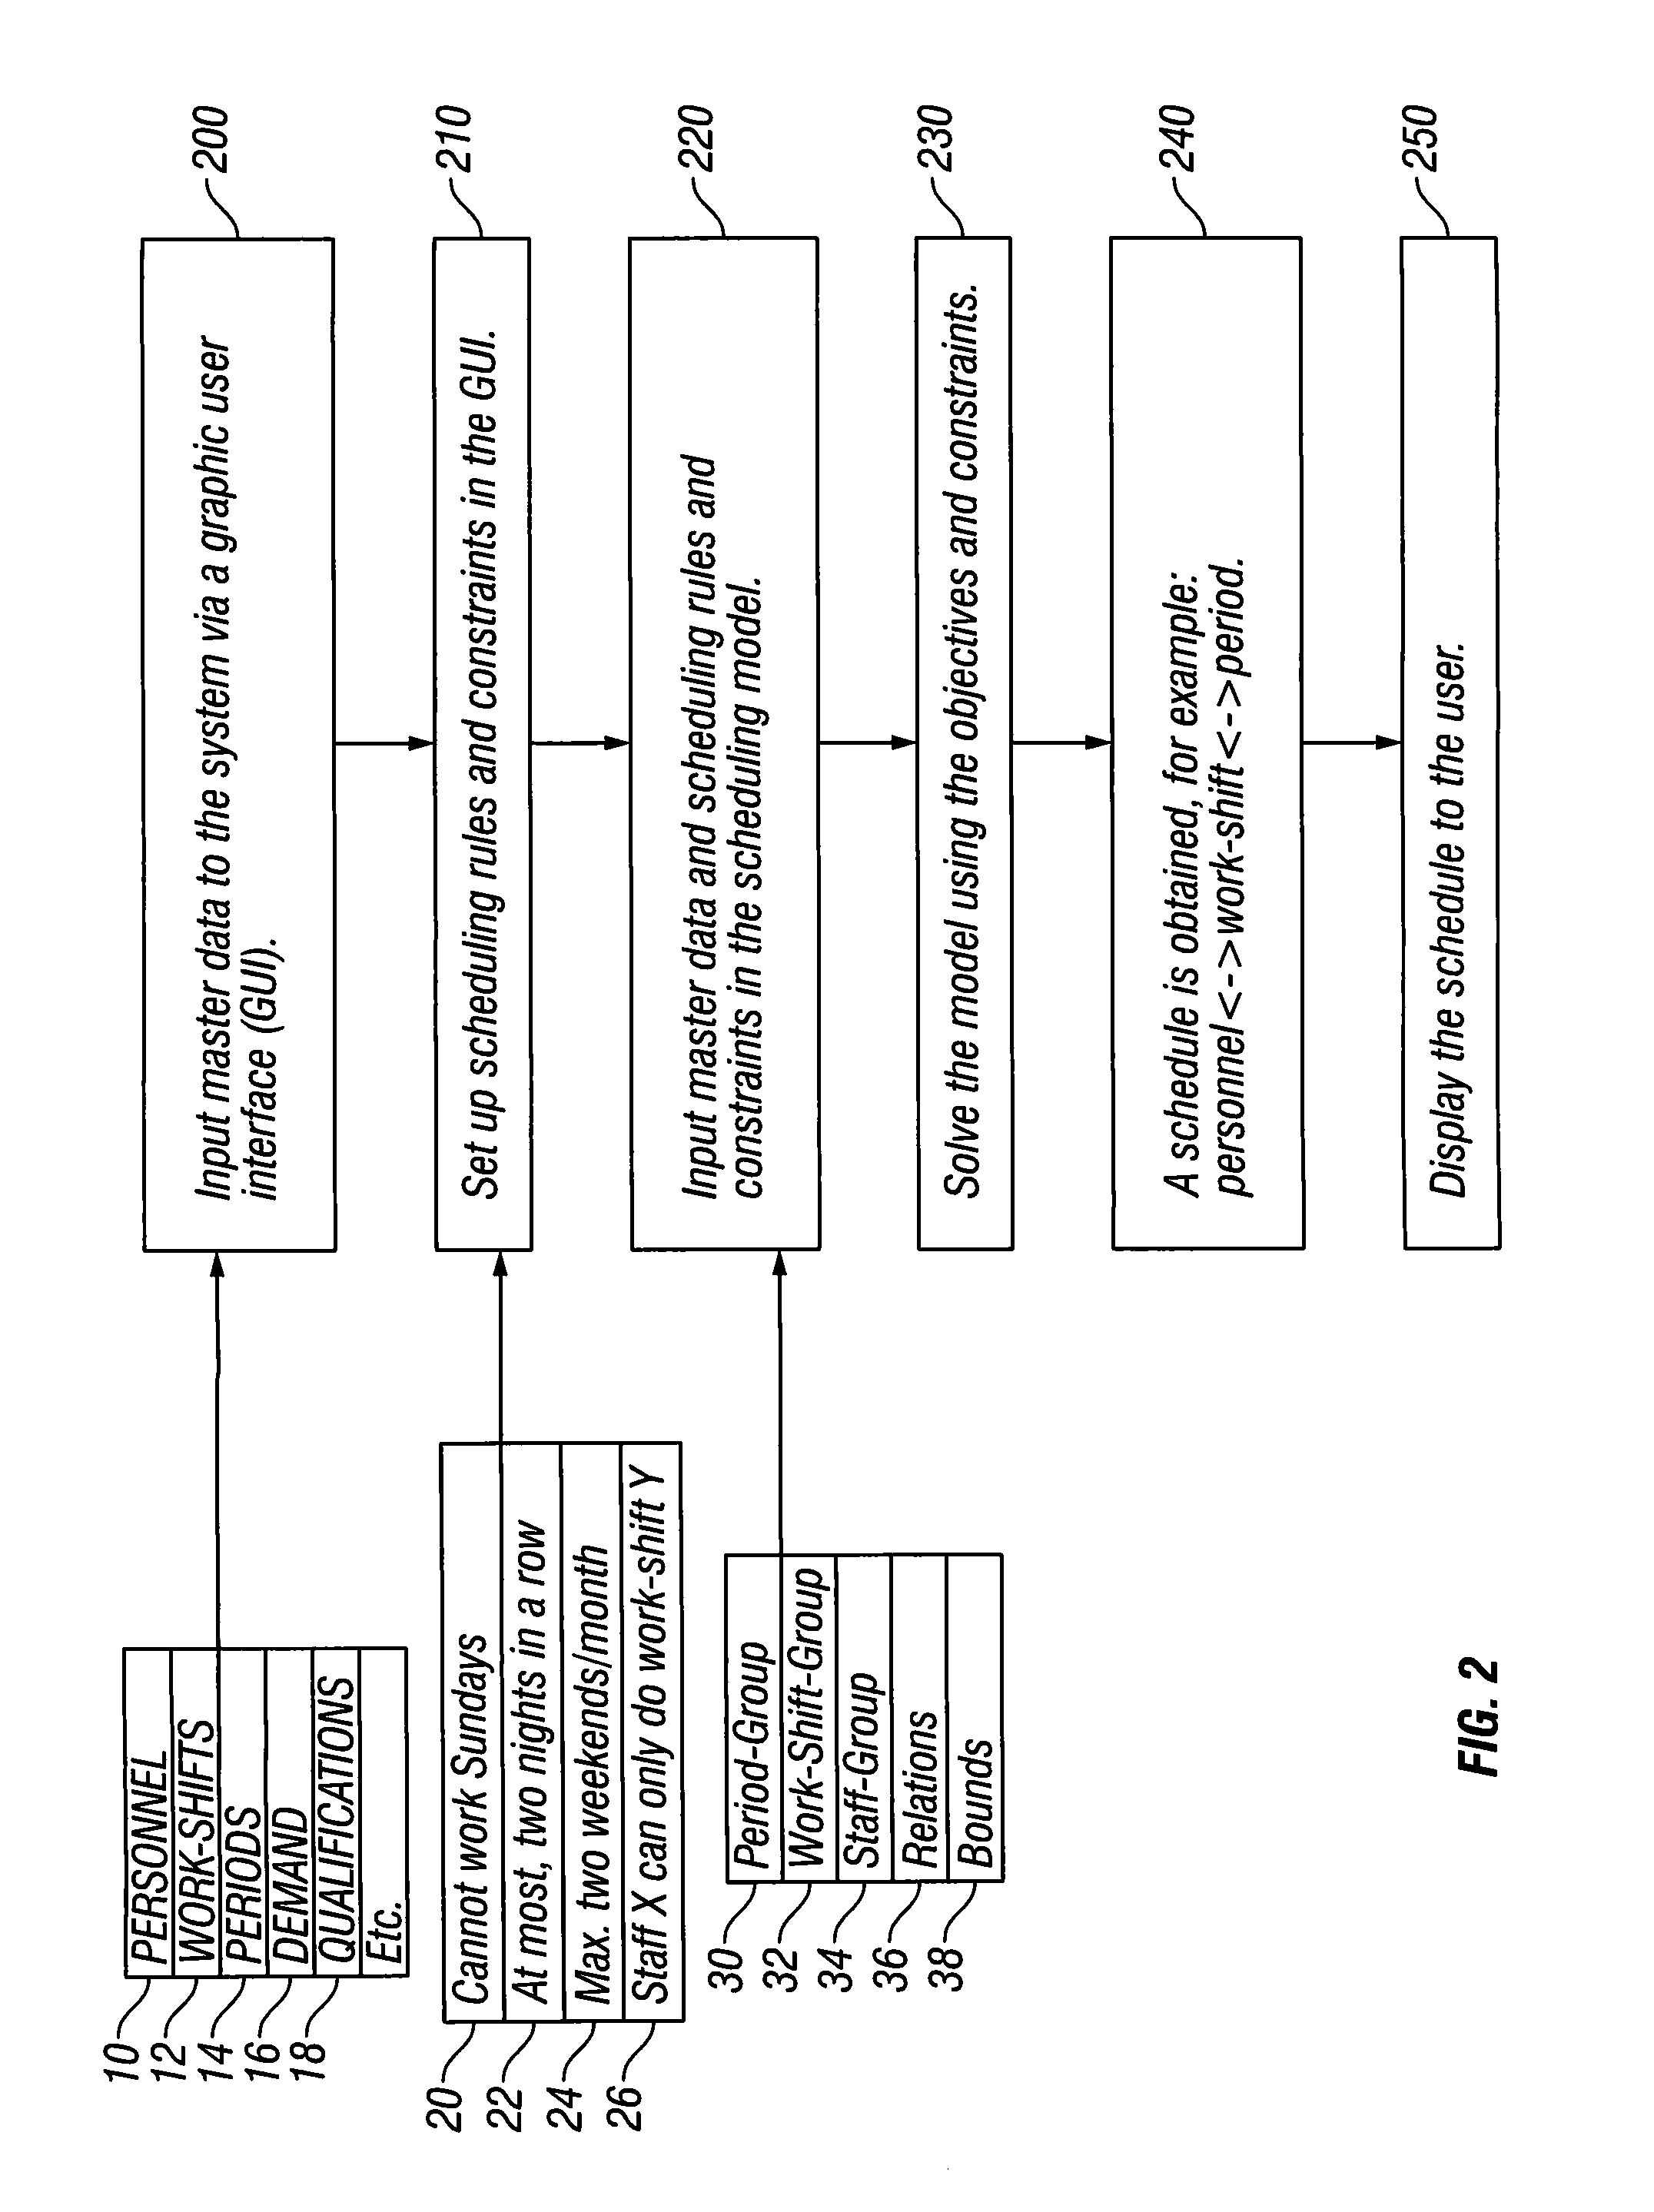 Method and apparatus for constraint-based staff scheduling